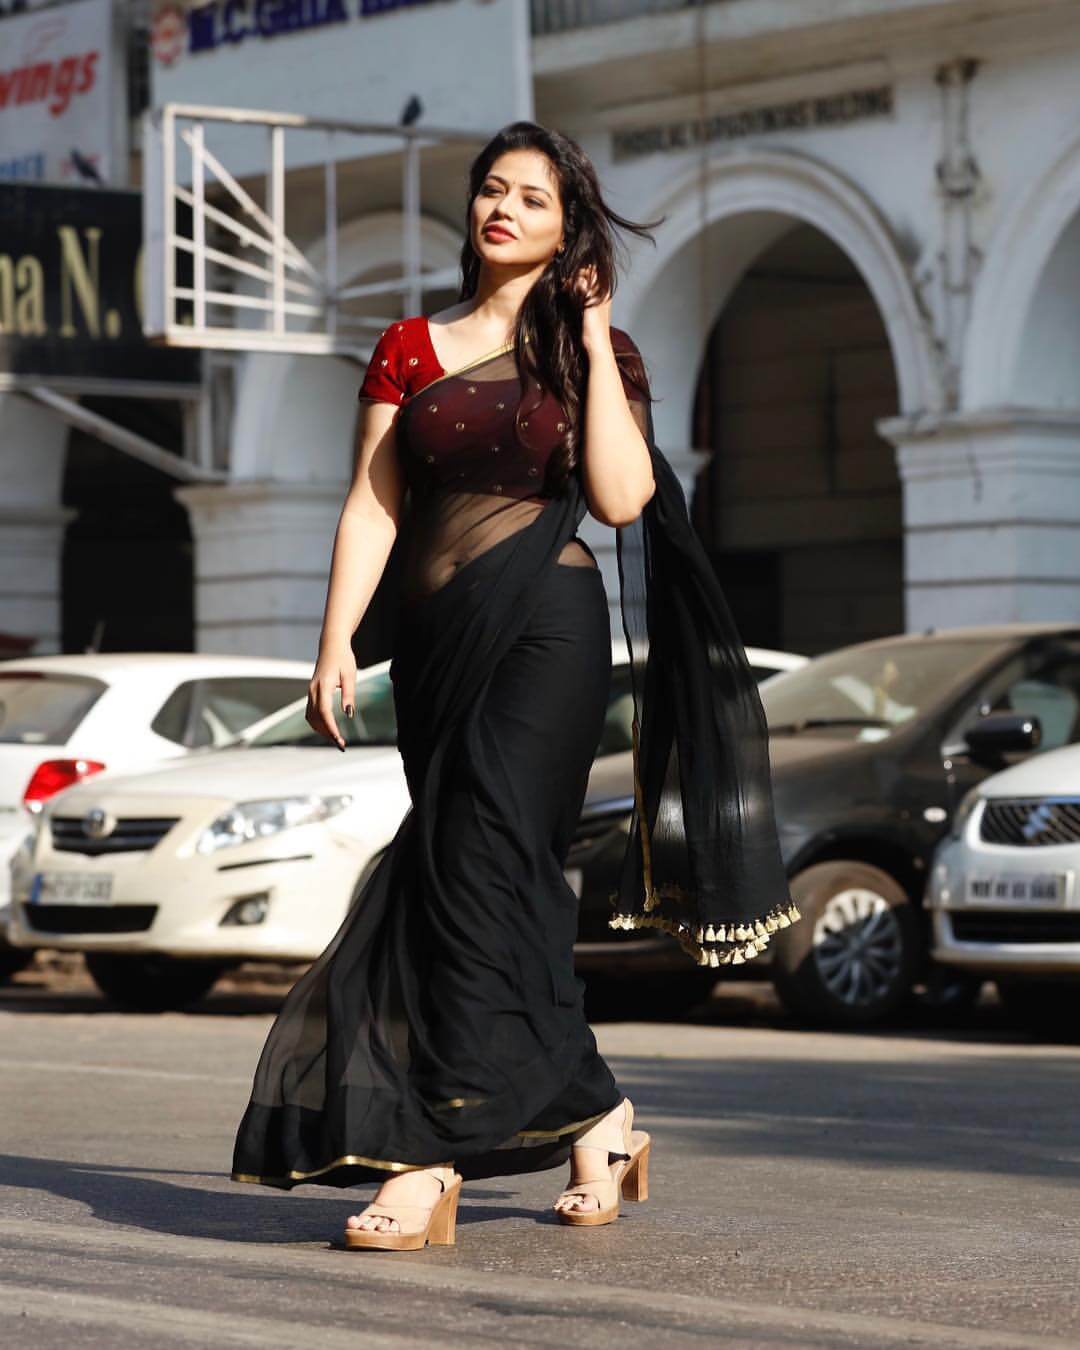 Priyanka Look Elegant In Plain Black Saree With a Red Blouse Outfit